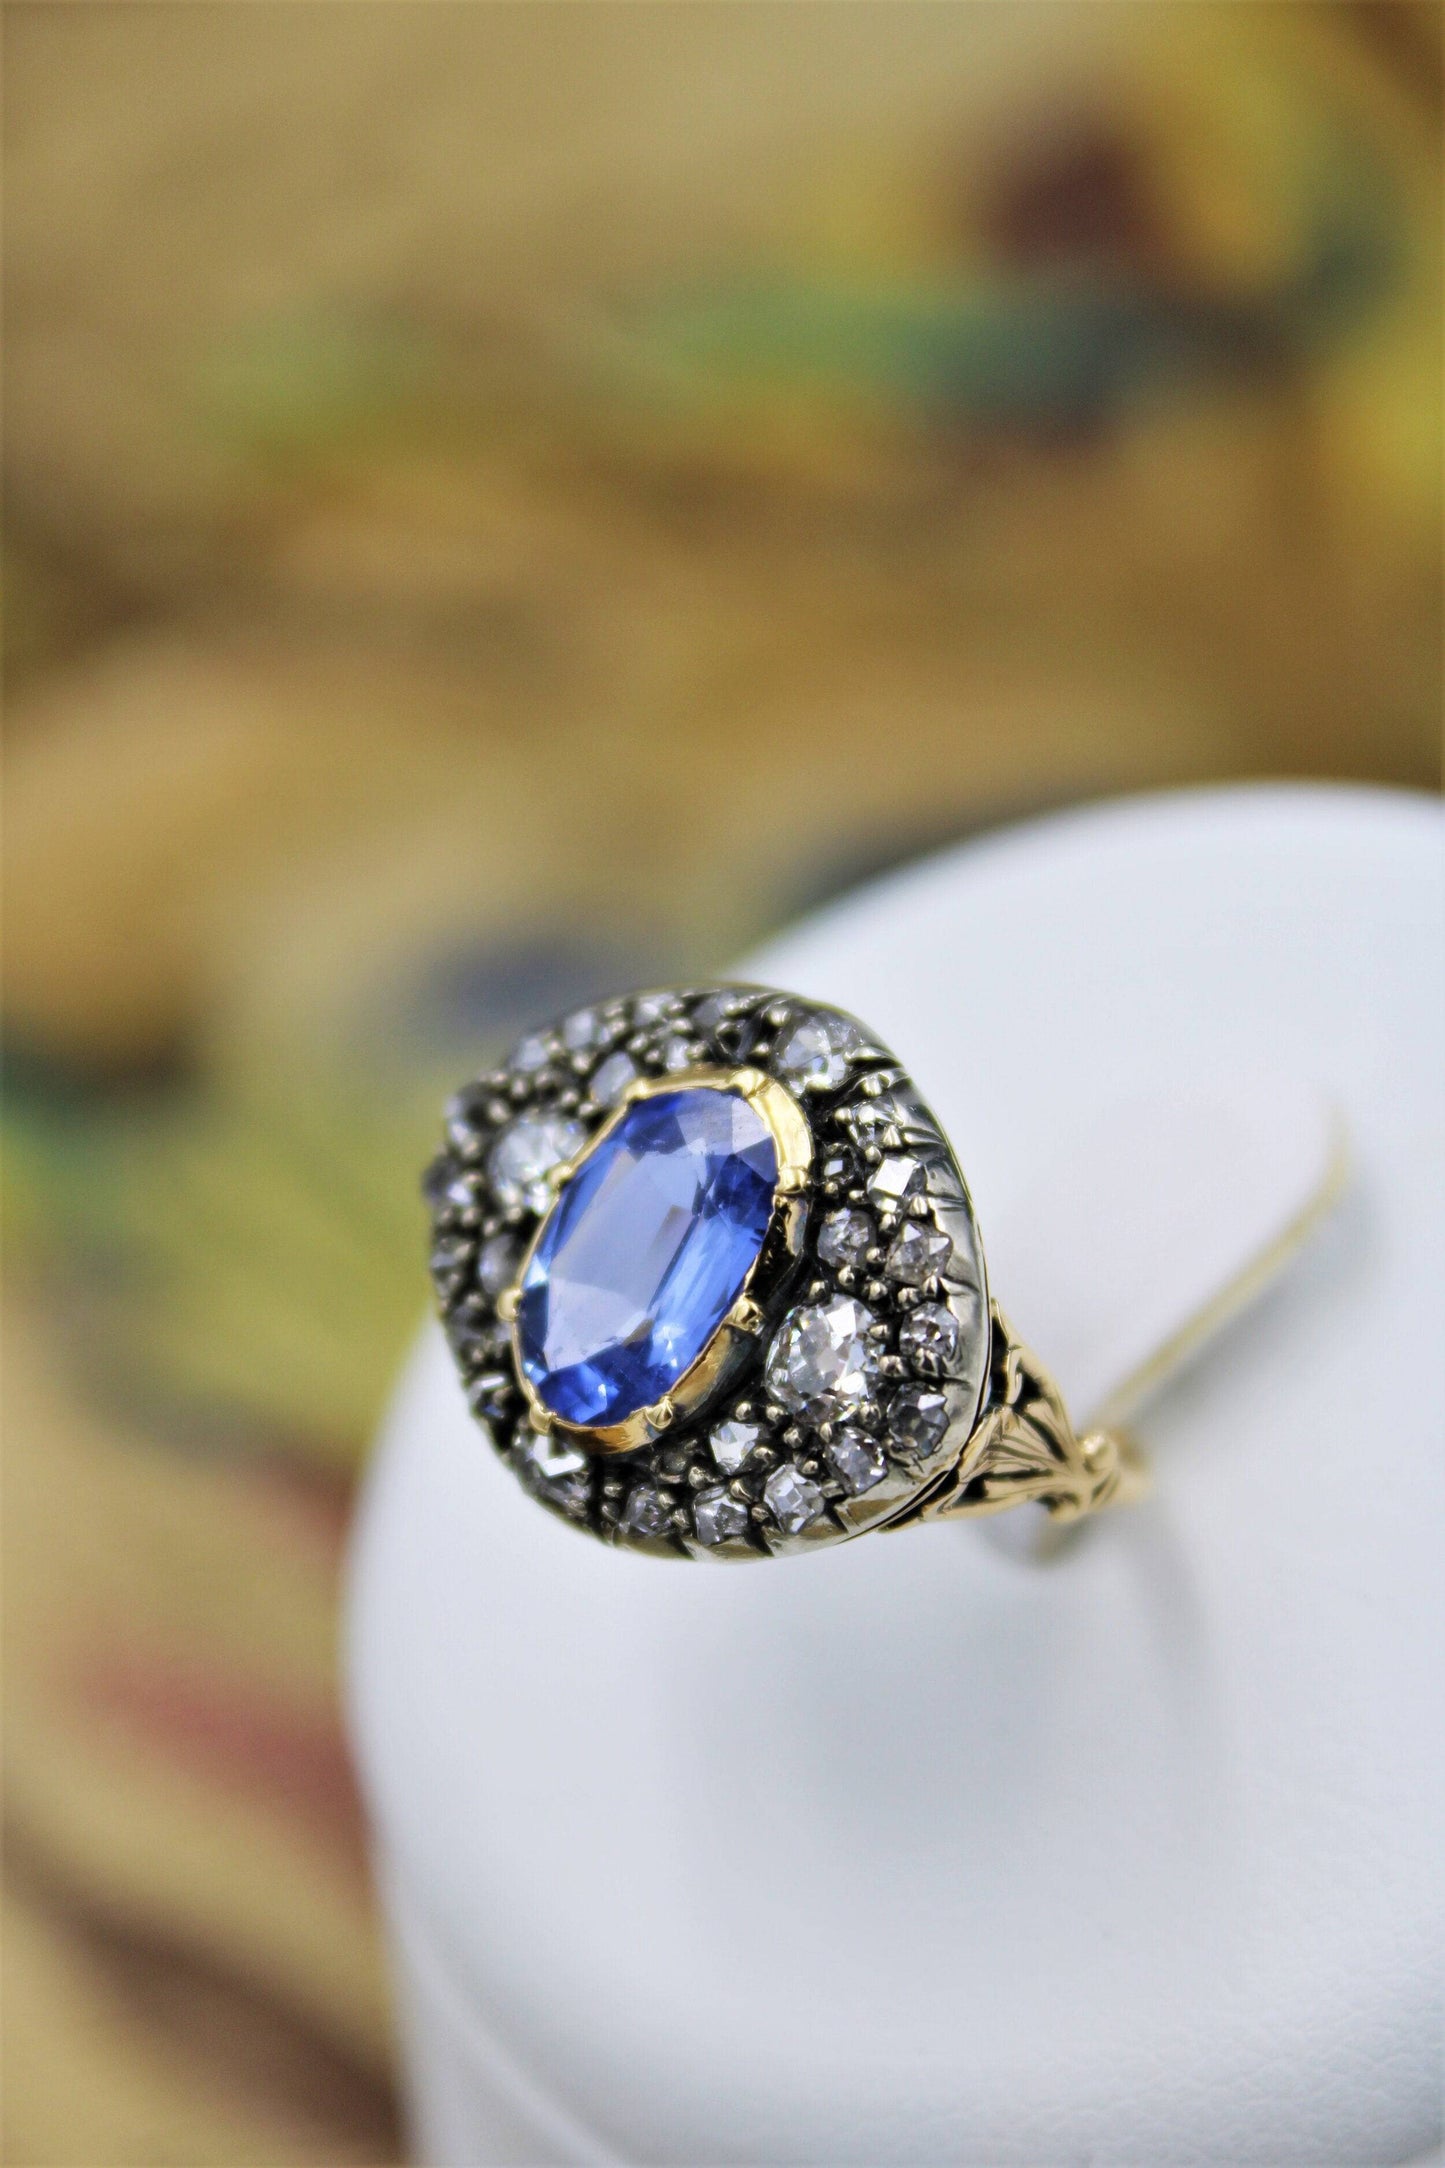 A very fine Georgian/ Victorian Sapphire & Diamond Cluster Ring in 18ct Yellow Gold & Silver. - Robin Haydock Antiques